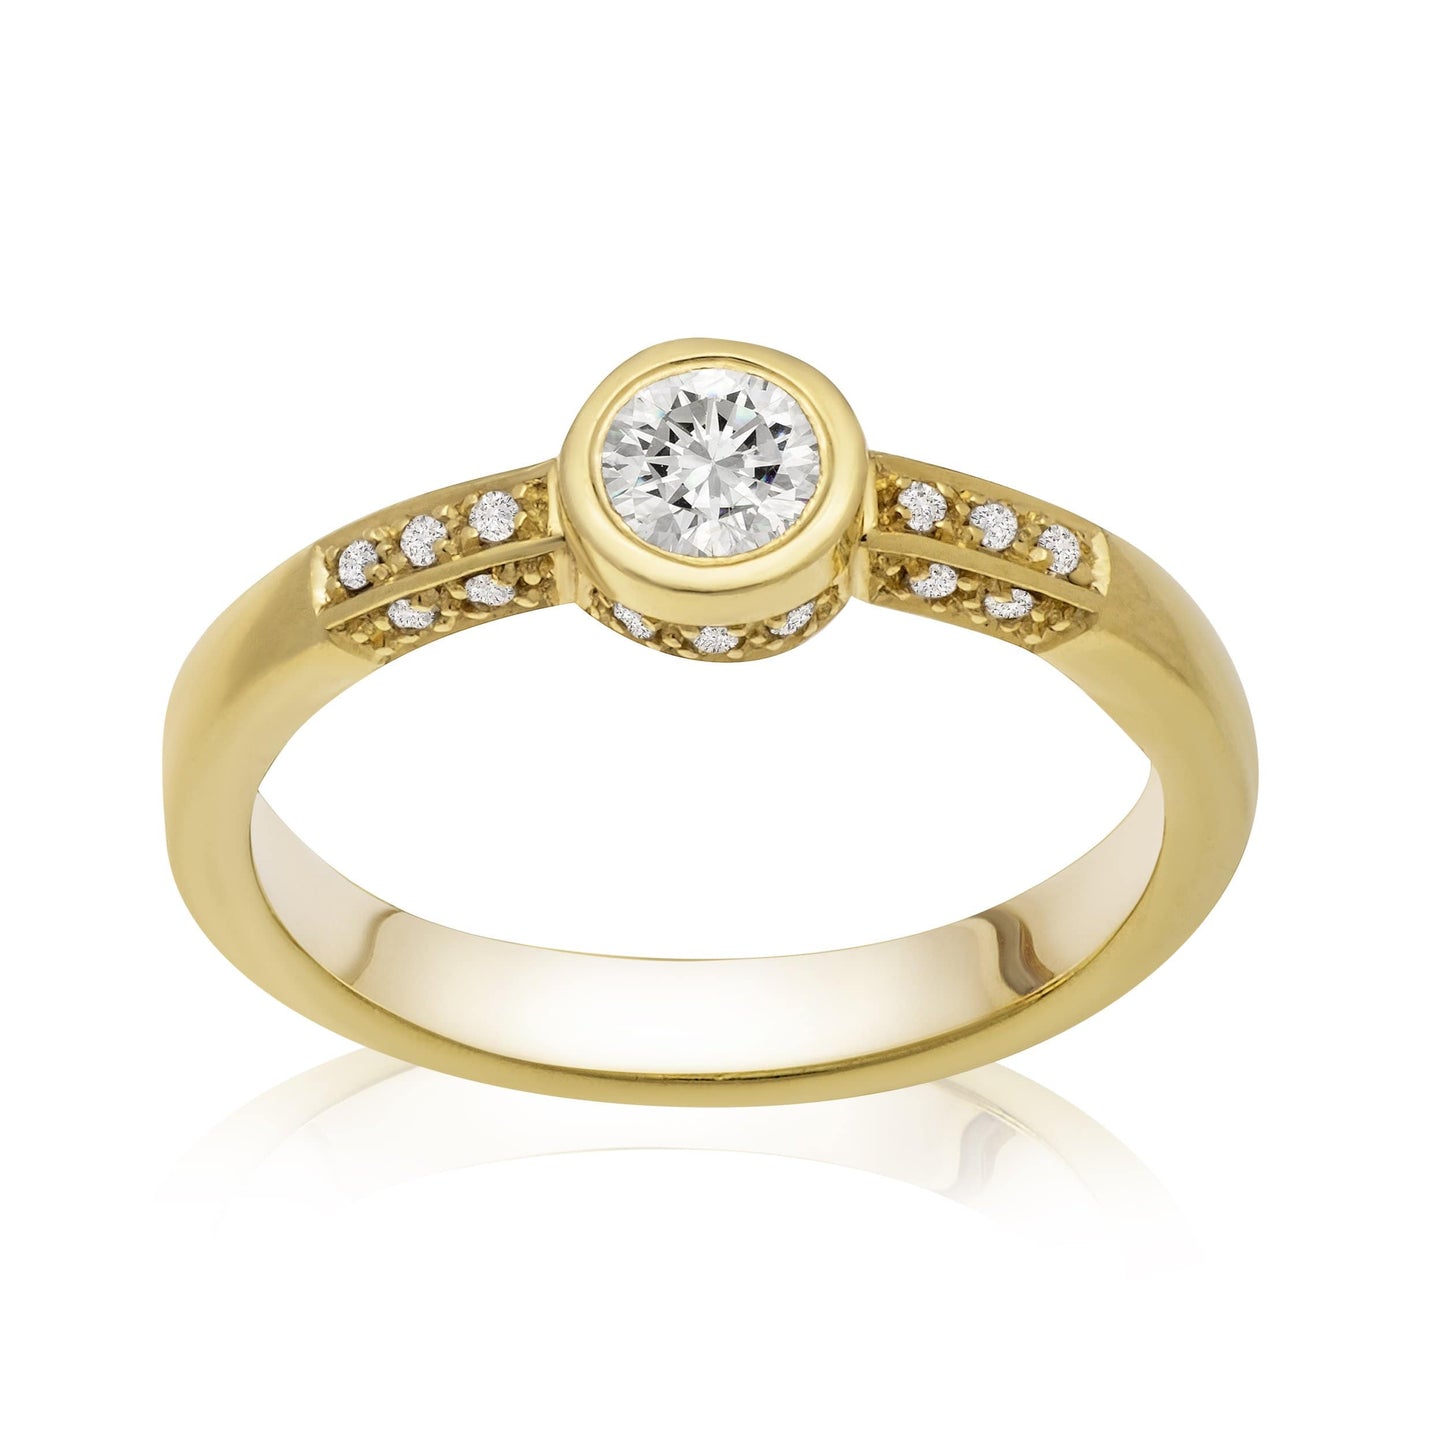 Dalia T Online Ring Bridal Collection 14KT Yellow Gold 0.40CT TW Diamond Solitaire Ring